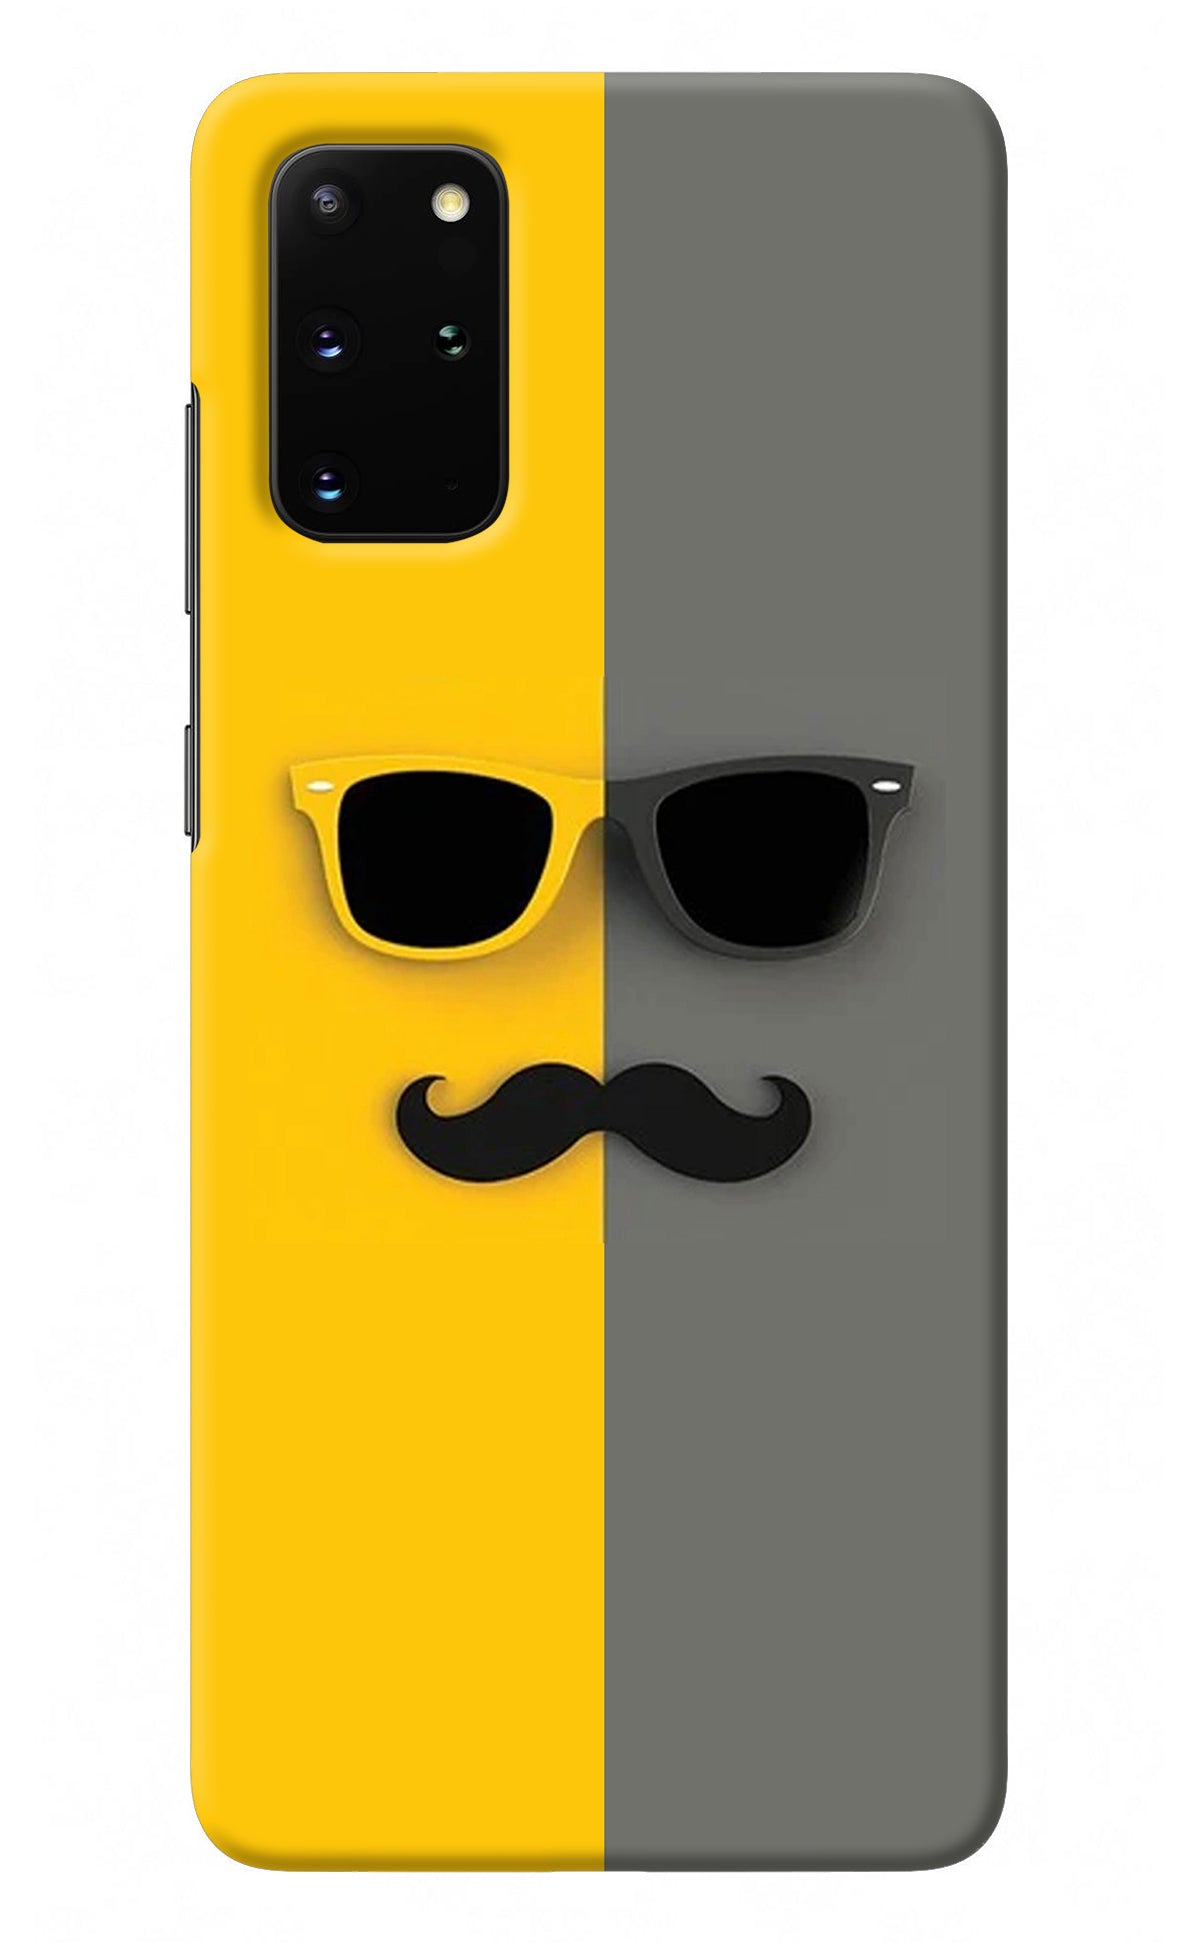 Sunglasses with Mustache Samsung S20 Plus Back Cover